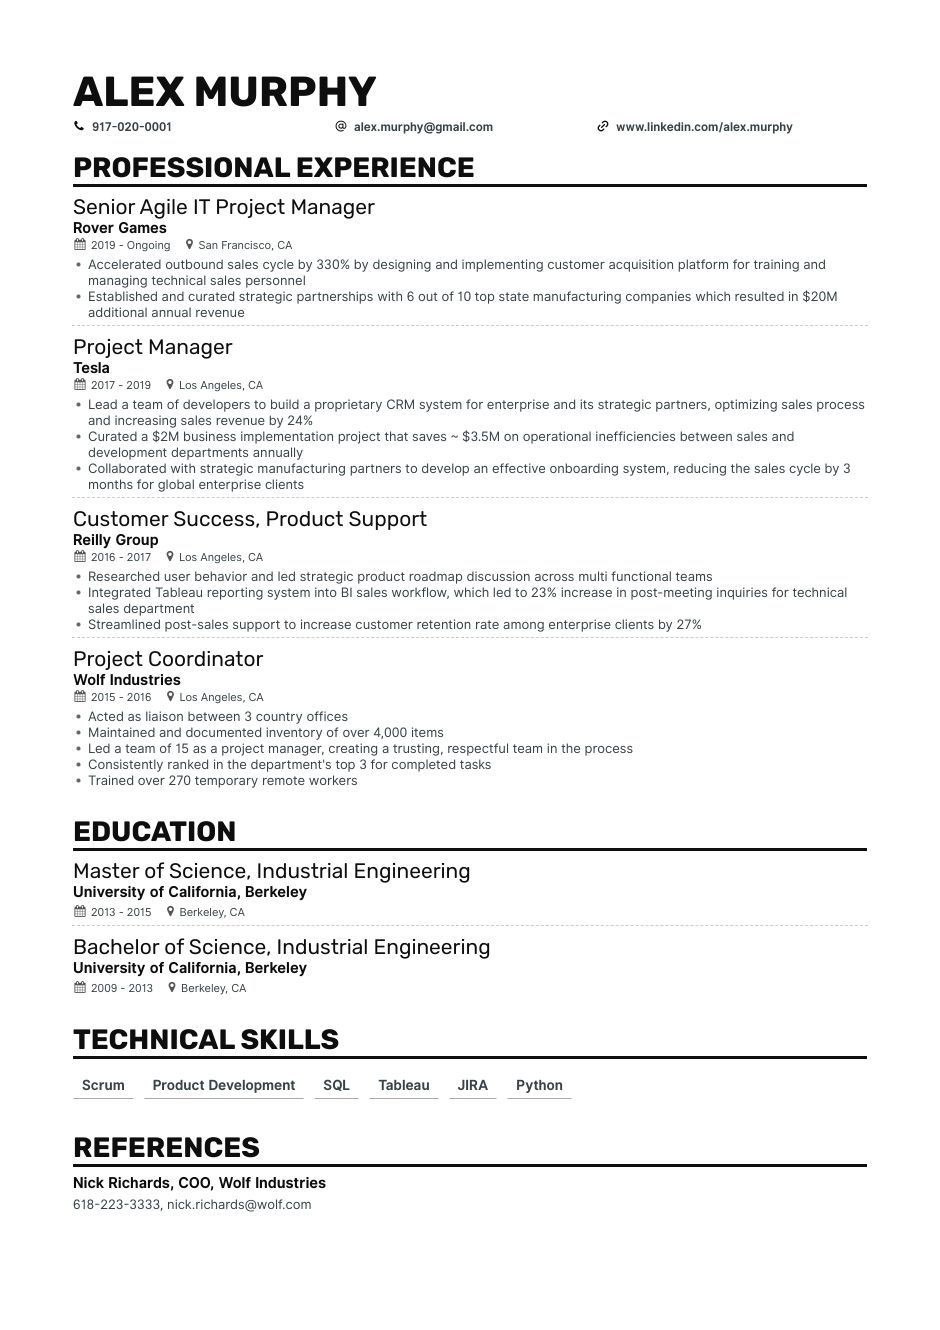 Sample Resume Objective Statement for Release Train Engineer Agile Scrum Master Resume Examples & Guide for 2022 (layout …